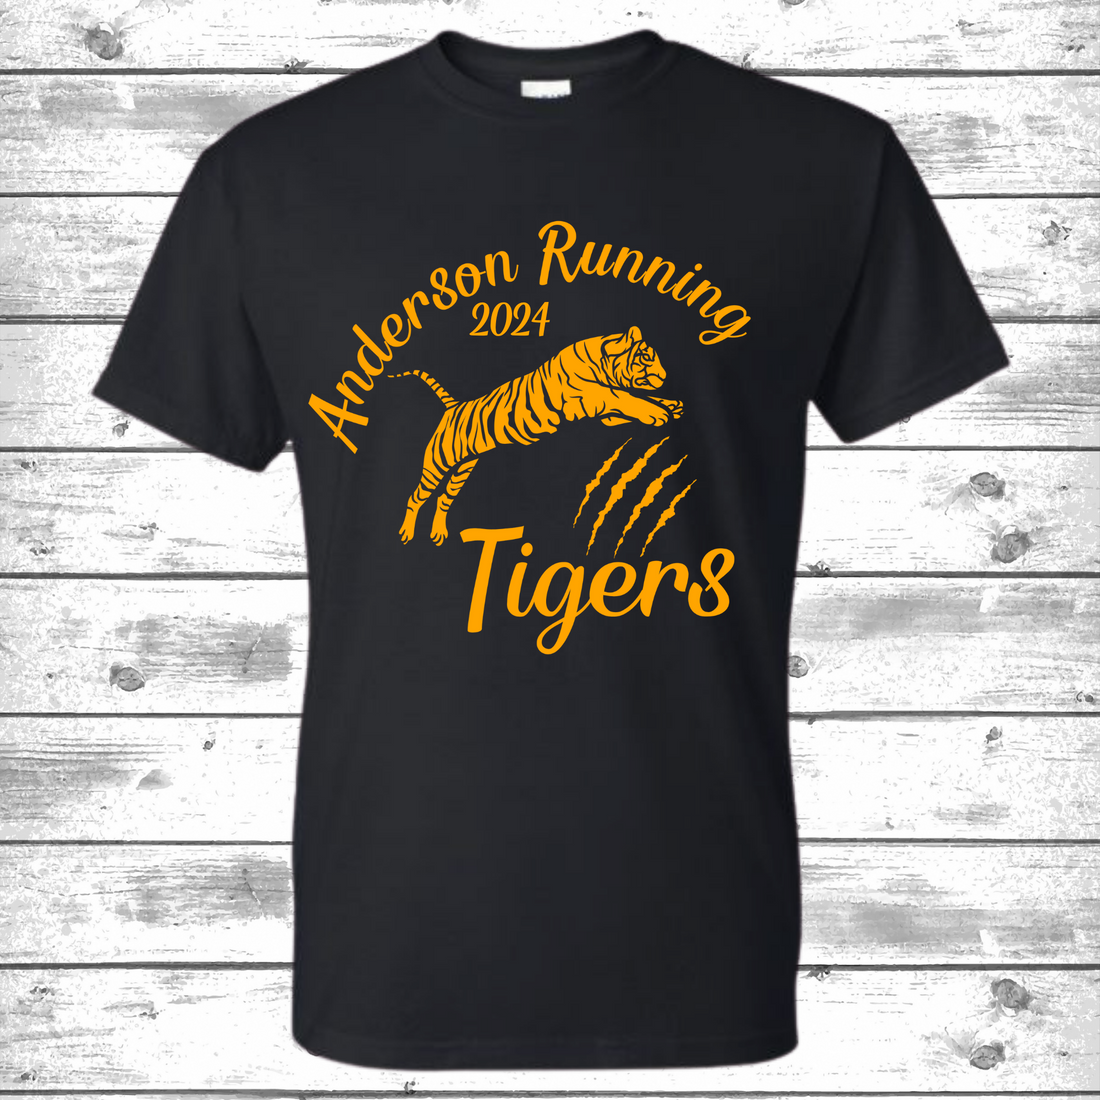 Anderson Tigers Running Club